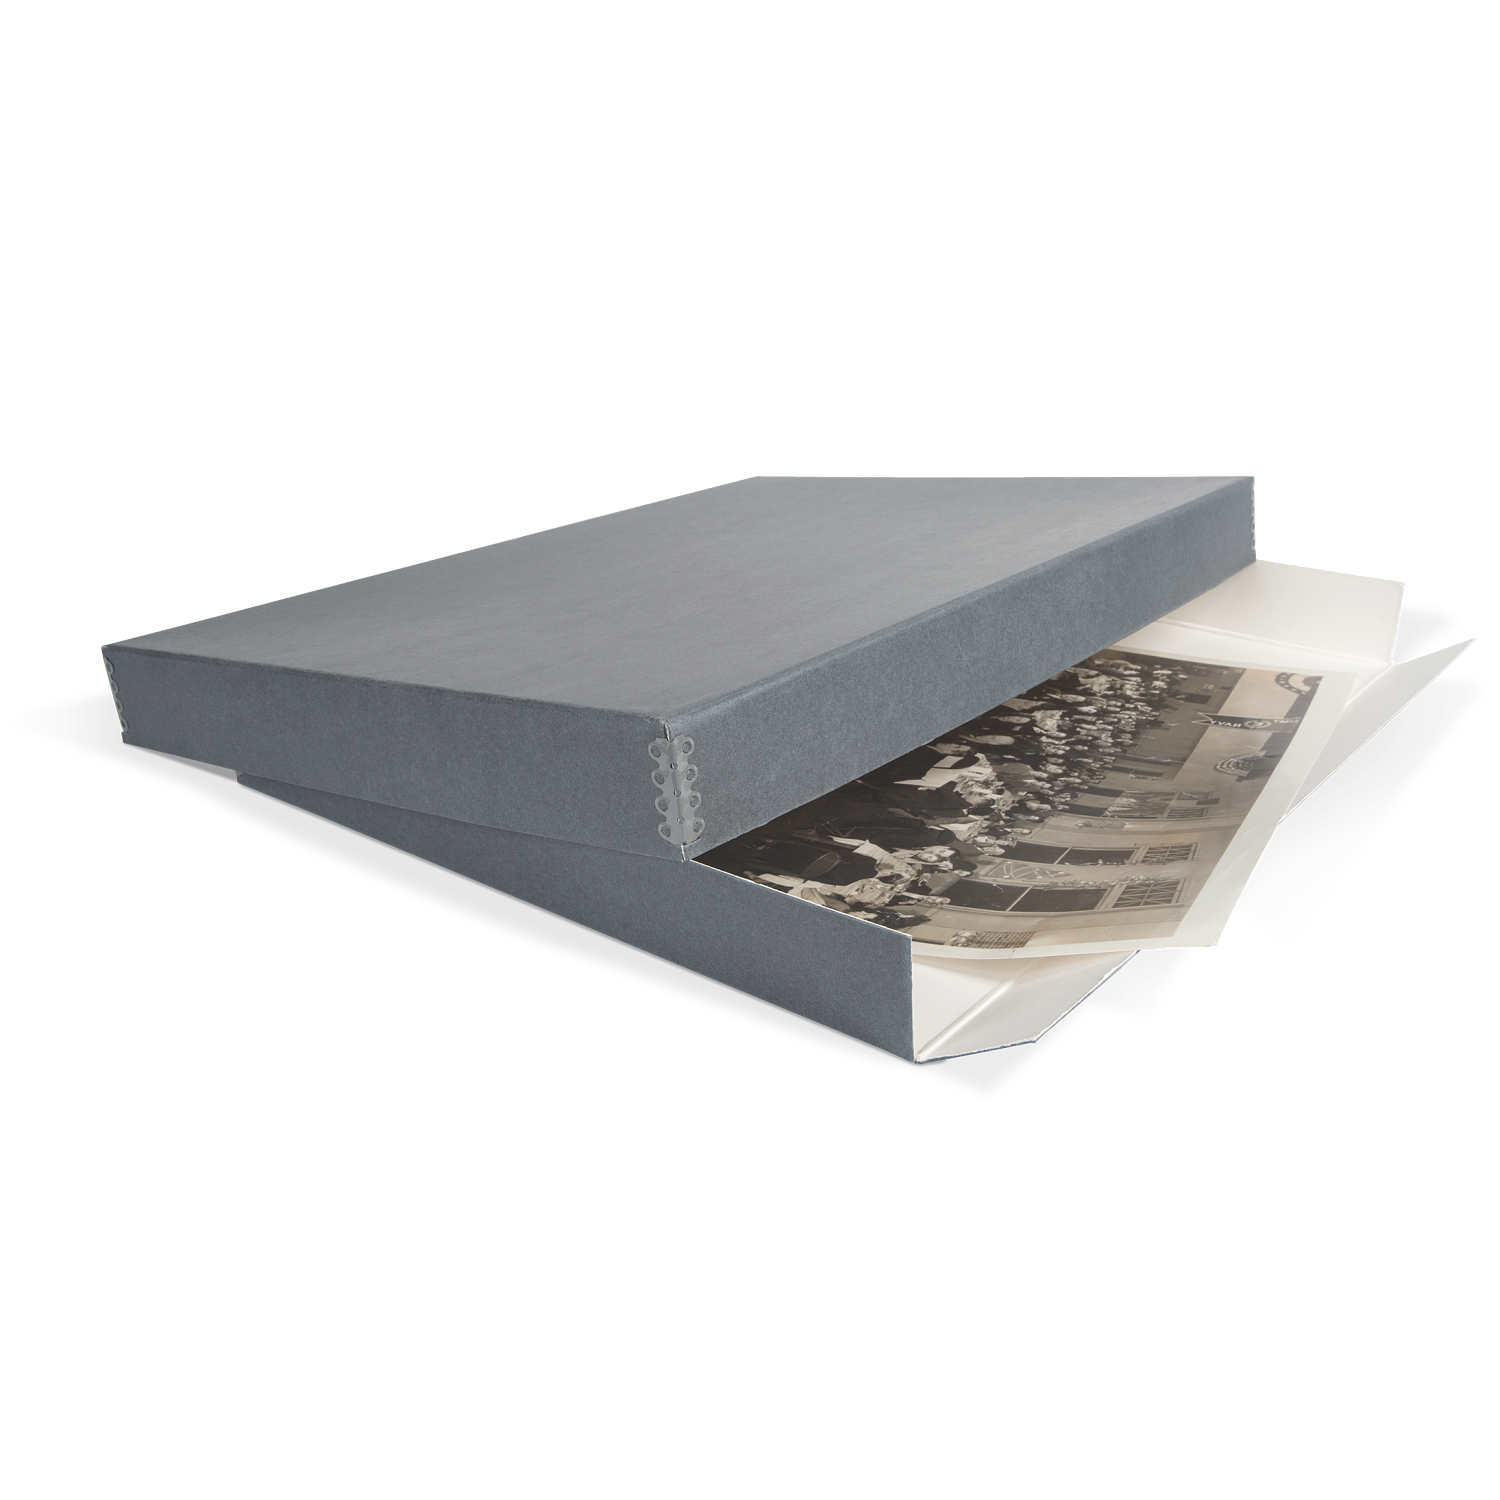 Gaylord Archival® Blue/Grey Drop-Front Newspaper & Oversize Print Box, Archival Storage Boxes, Preservation